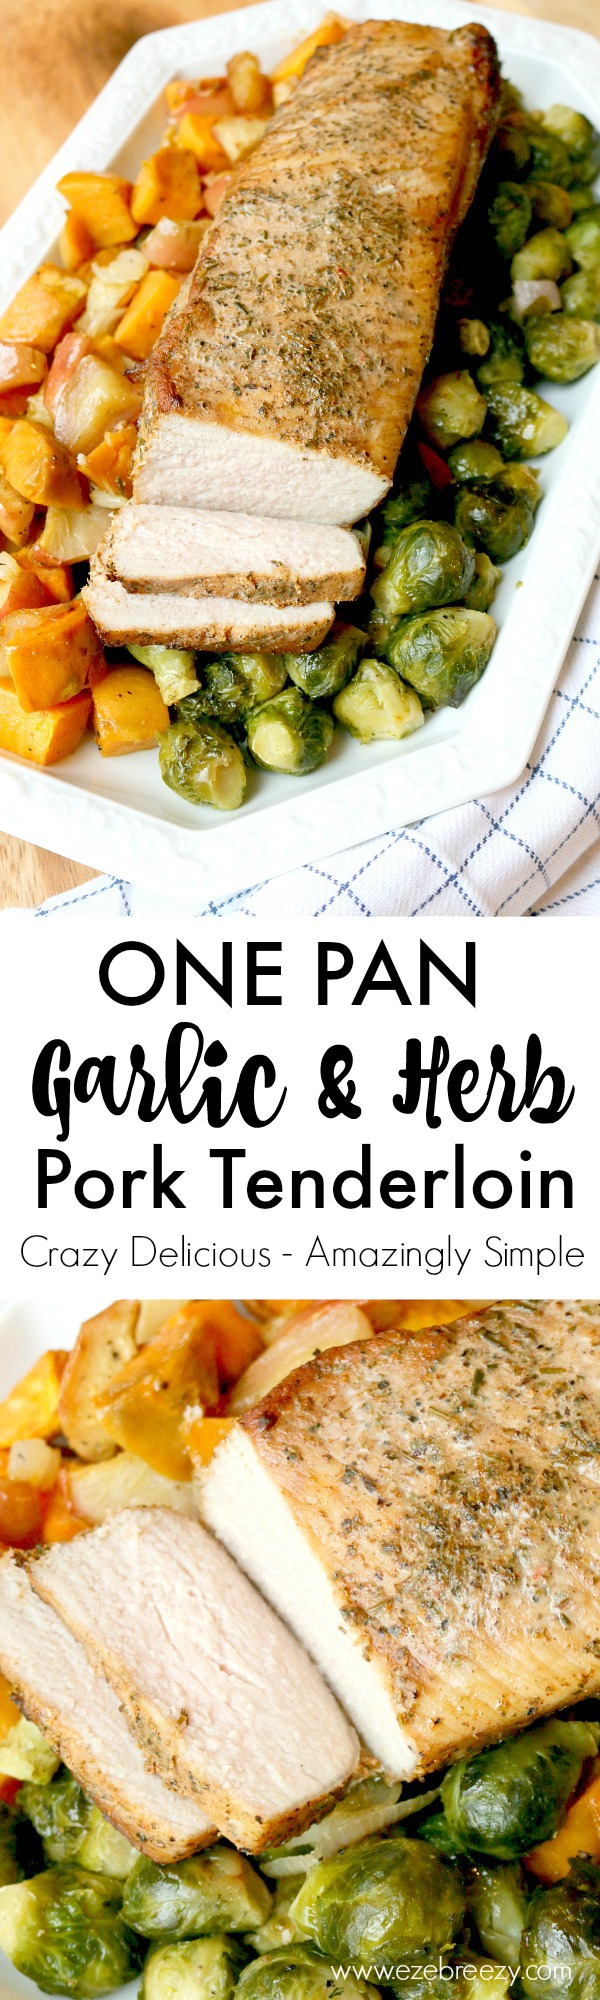 One Pan Pork Tenderloin - Make dinner time easy with this tender, juicy marinated roasted pork with seasonal vegetables. On the table in under 30 minutes! #RealFlavorRealFast #IC (ad)